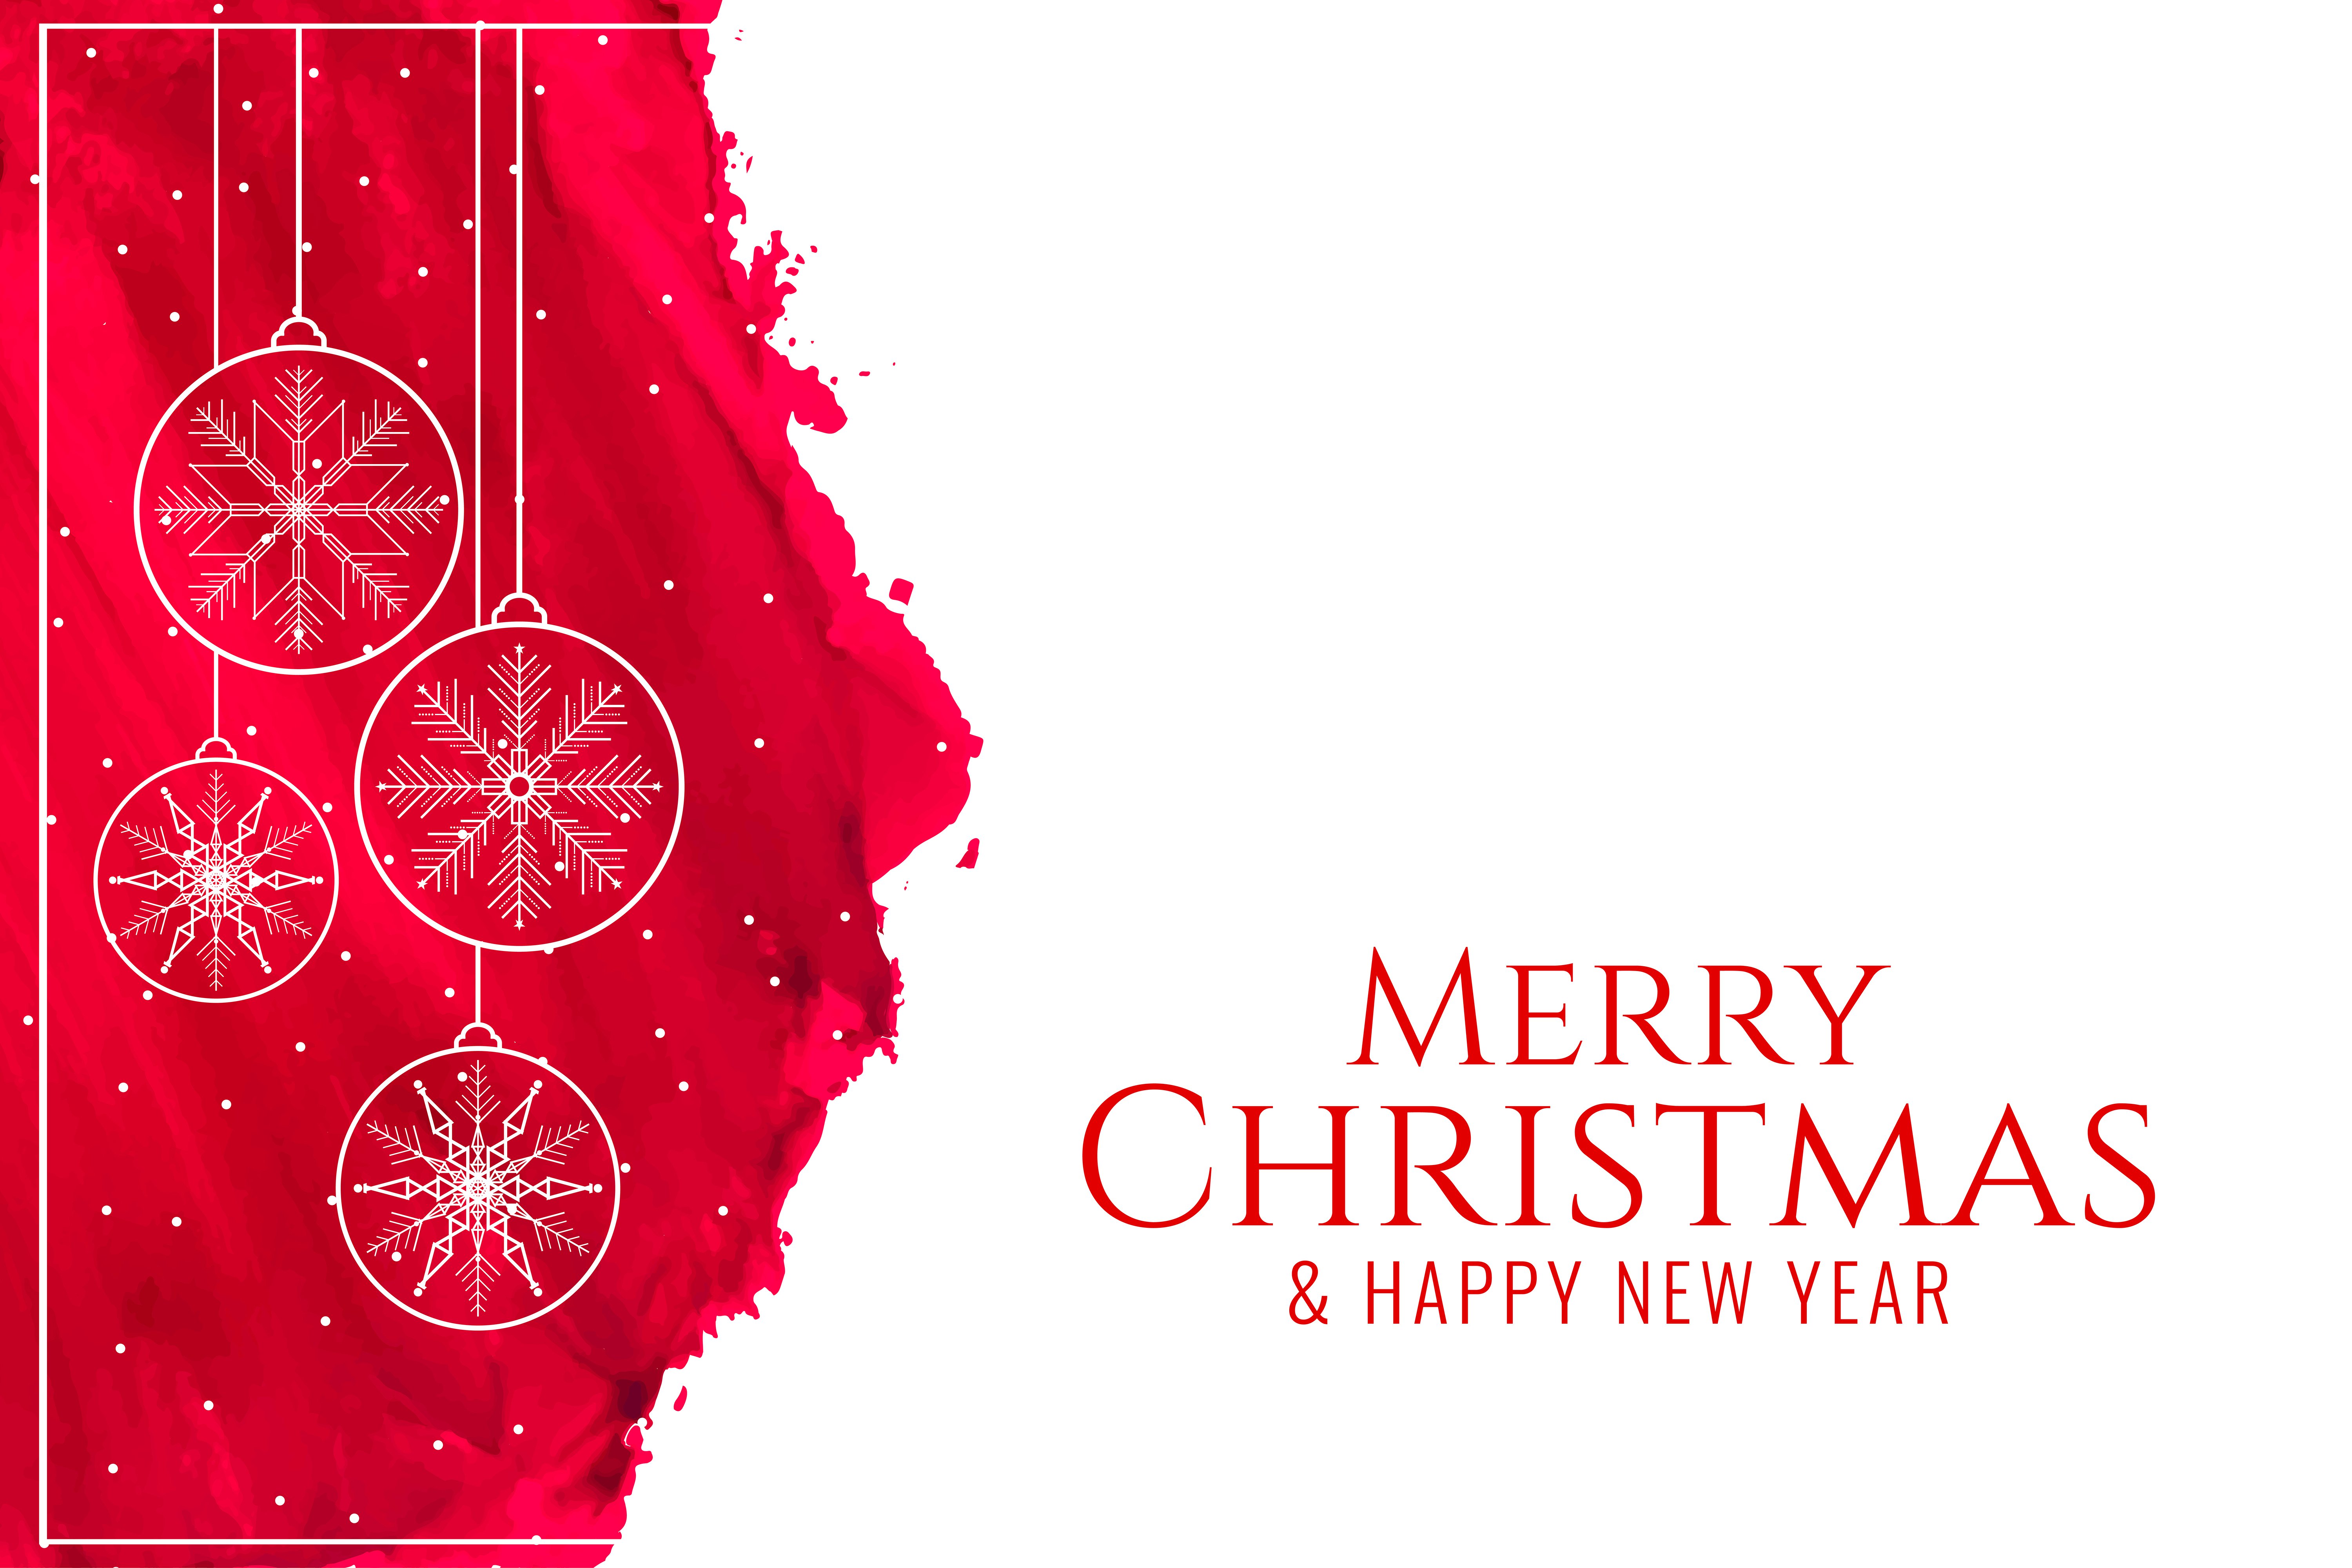 Merry Christmas and Happy New Year 2020 4K wallpaper 6000x4000